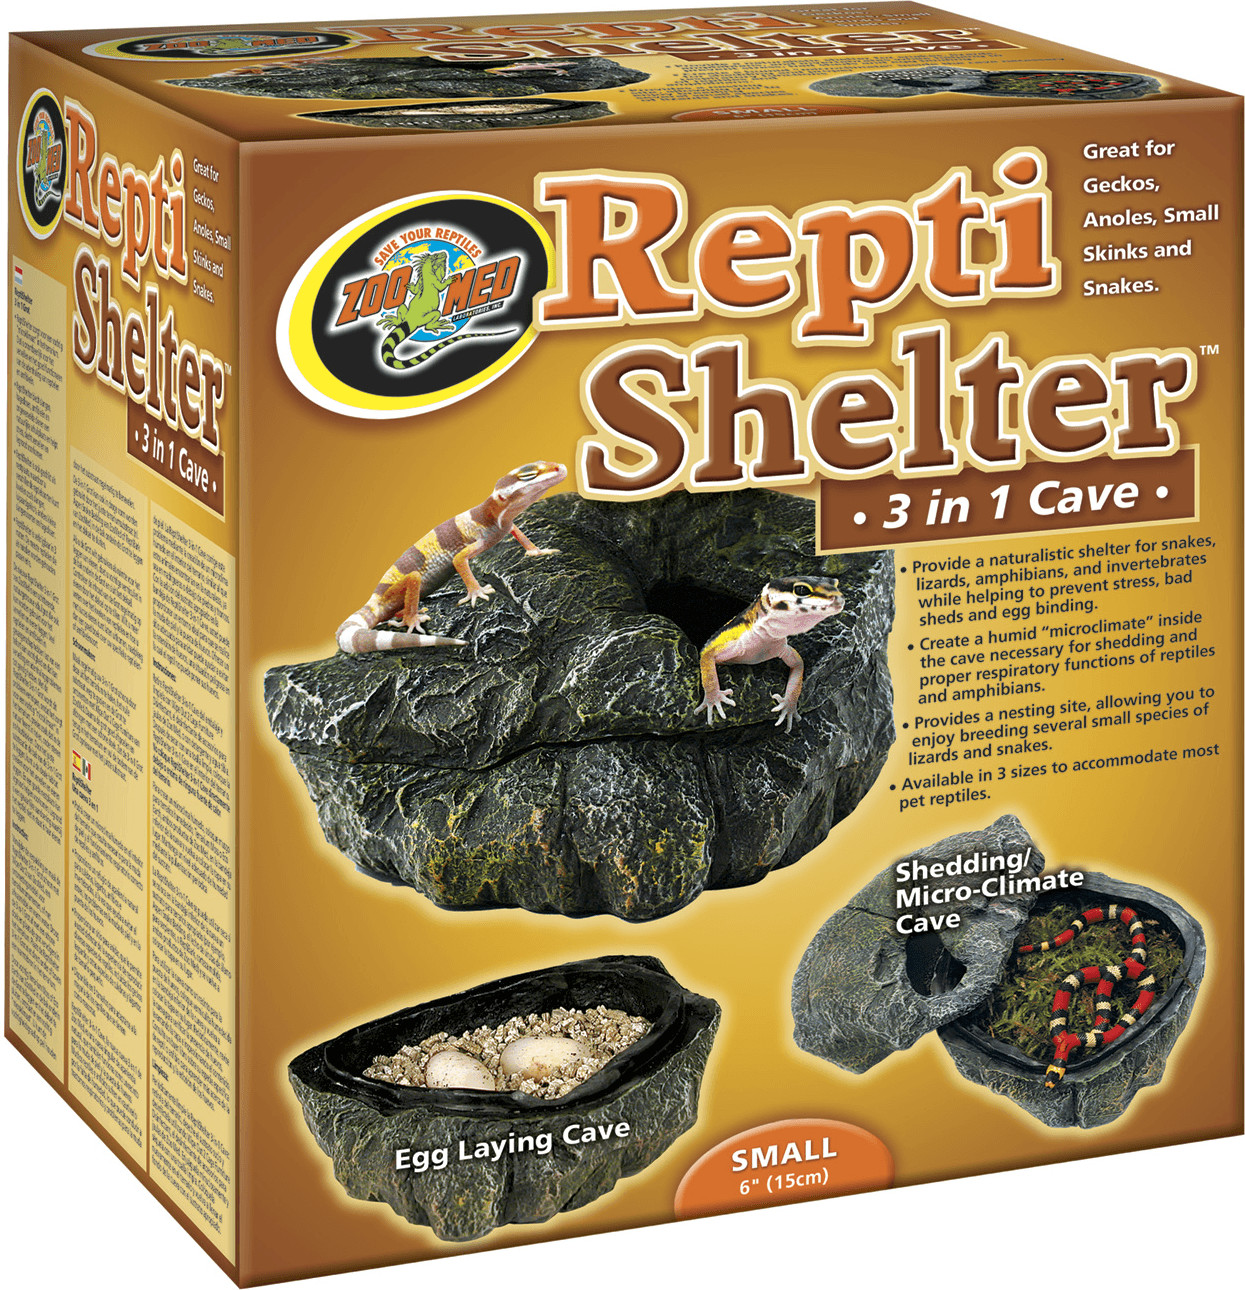 zoo med repti shelter 3 in 1 cave large